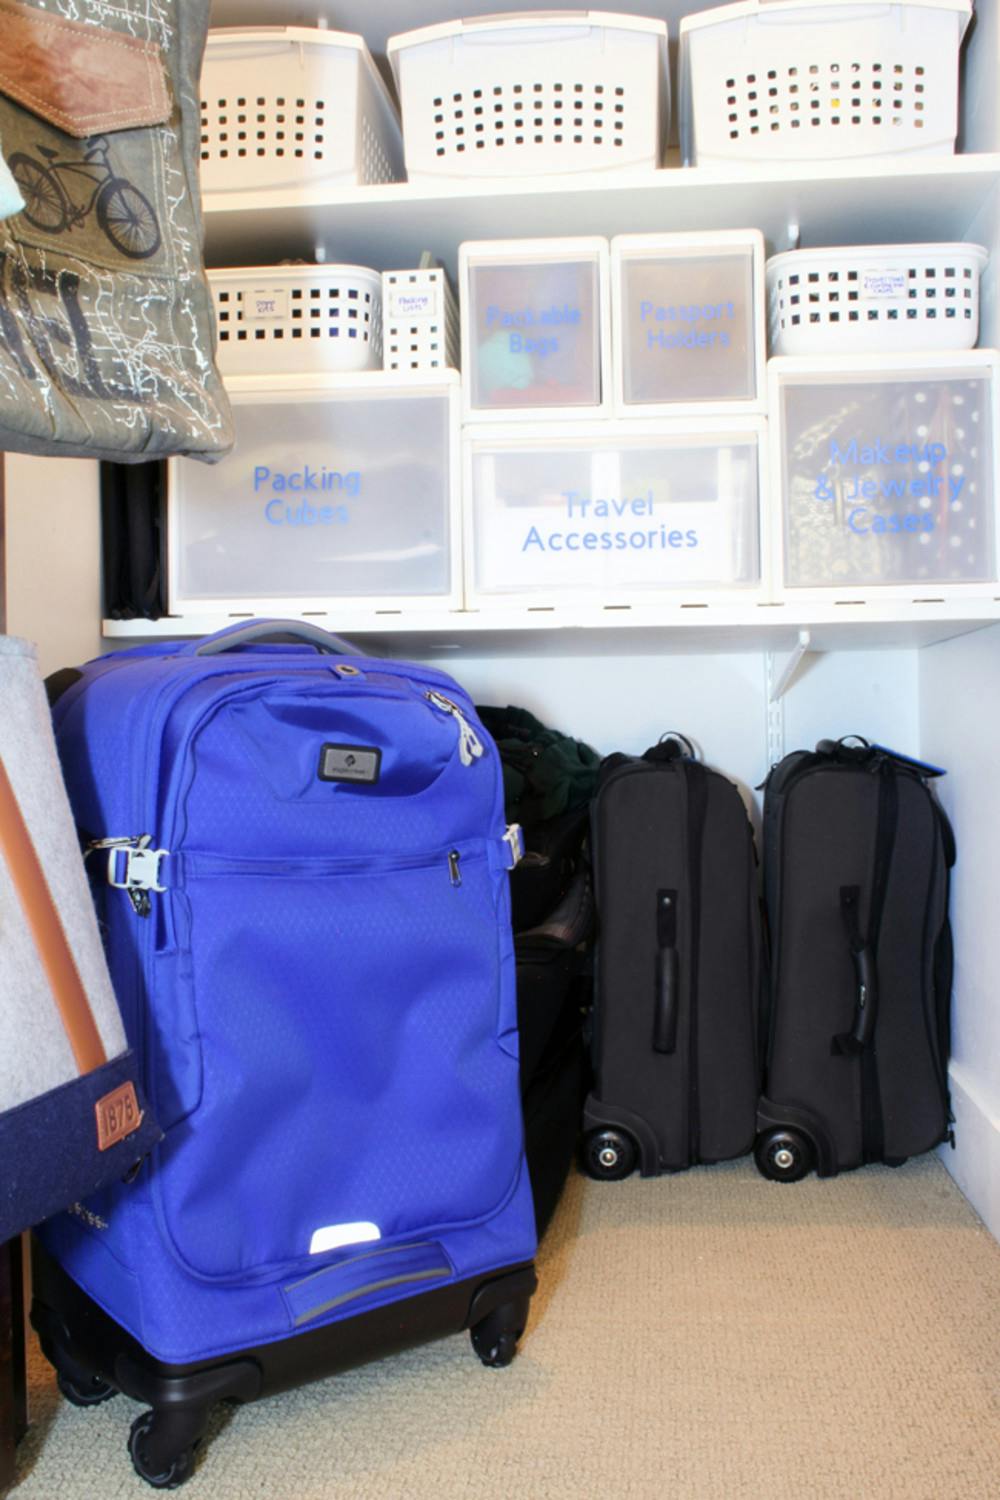 Backpacks, Luggages & Travel Accessories